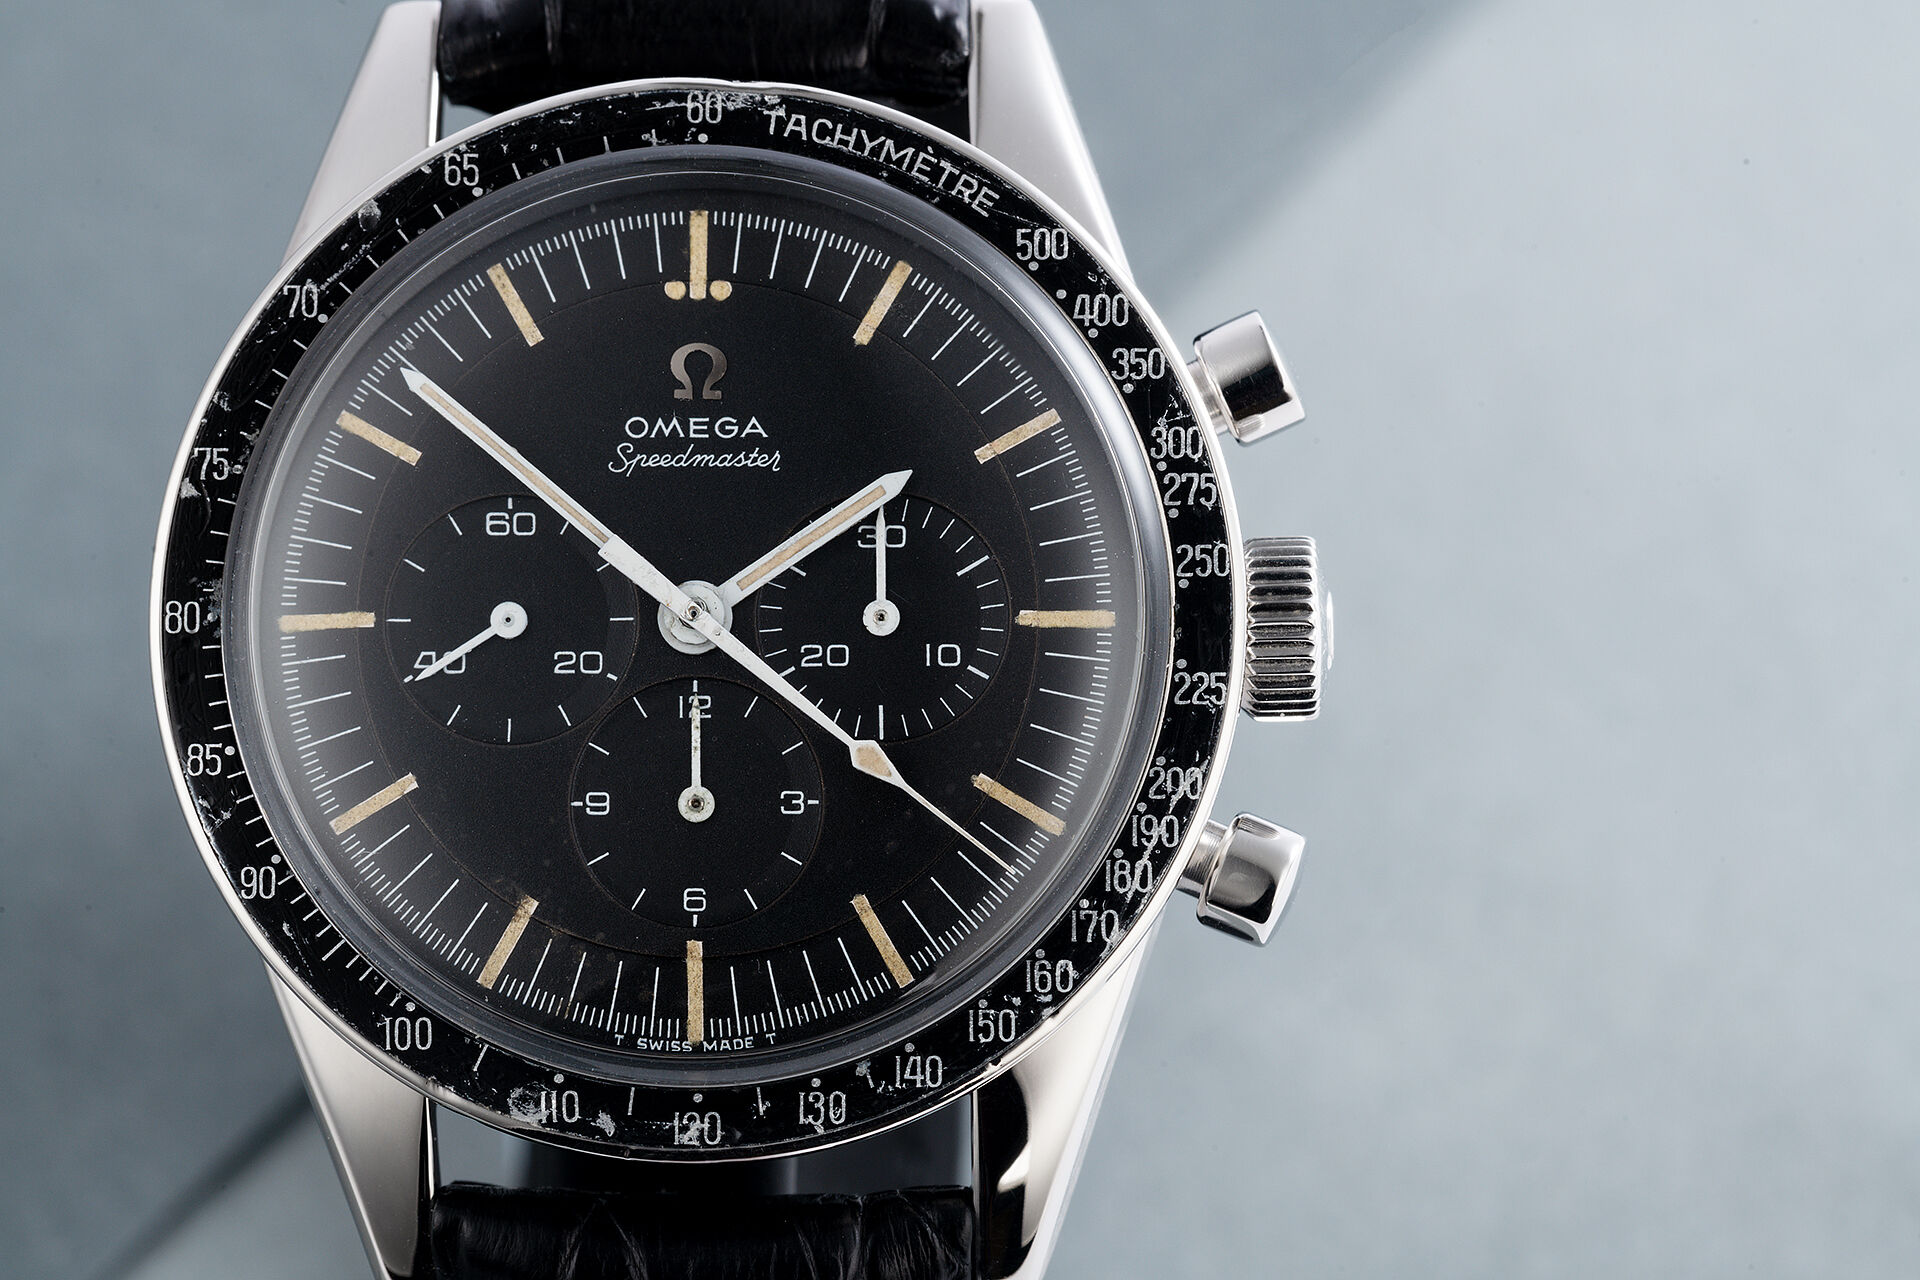 ref ST105.003-65 | 'Omega Extract from Archive' | Omega Speedmaster